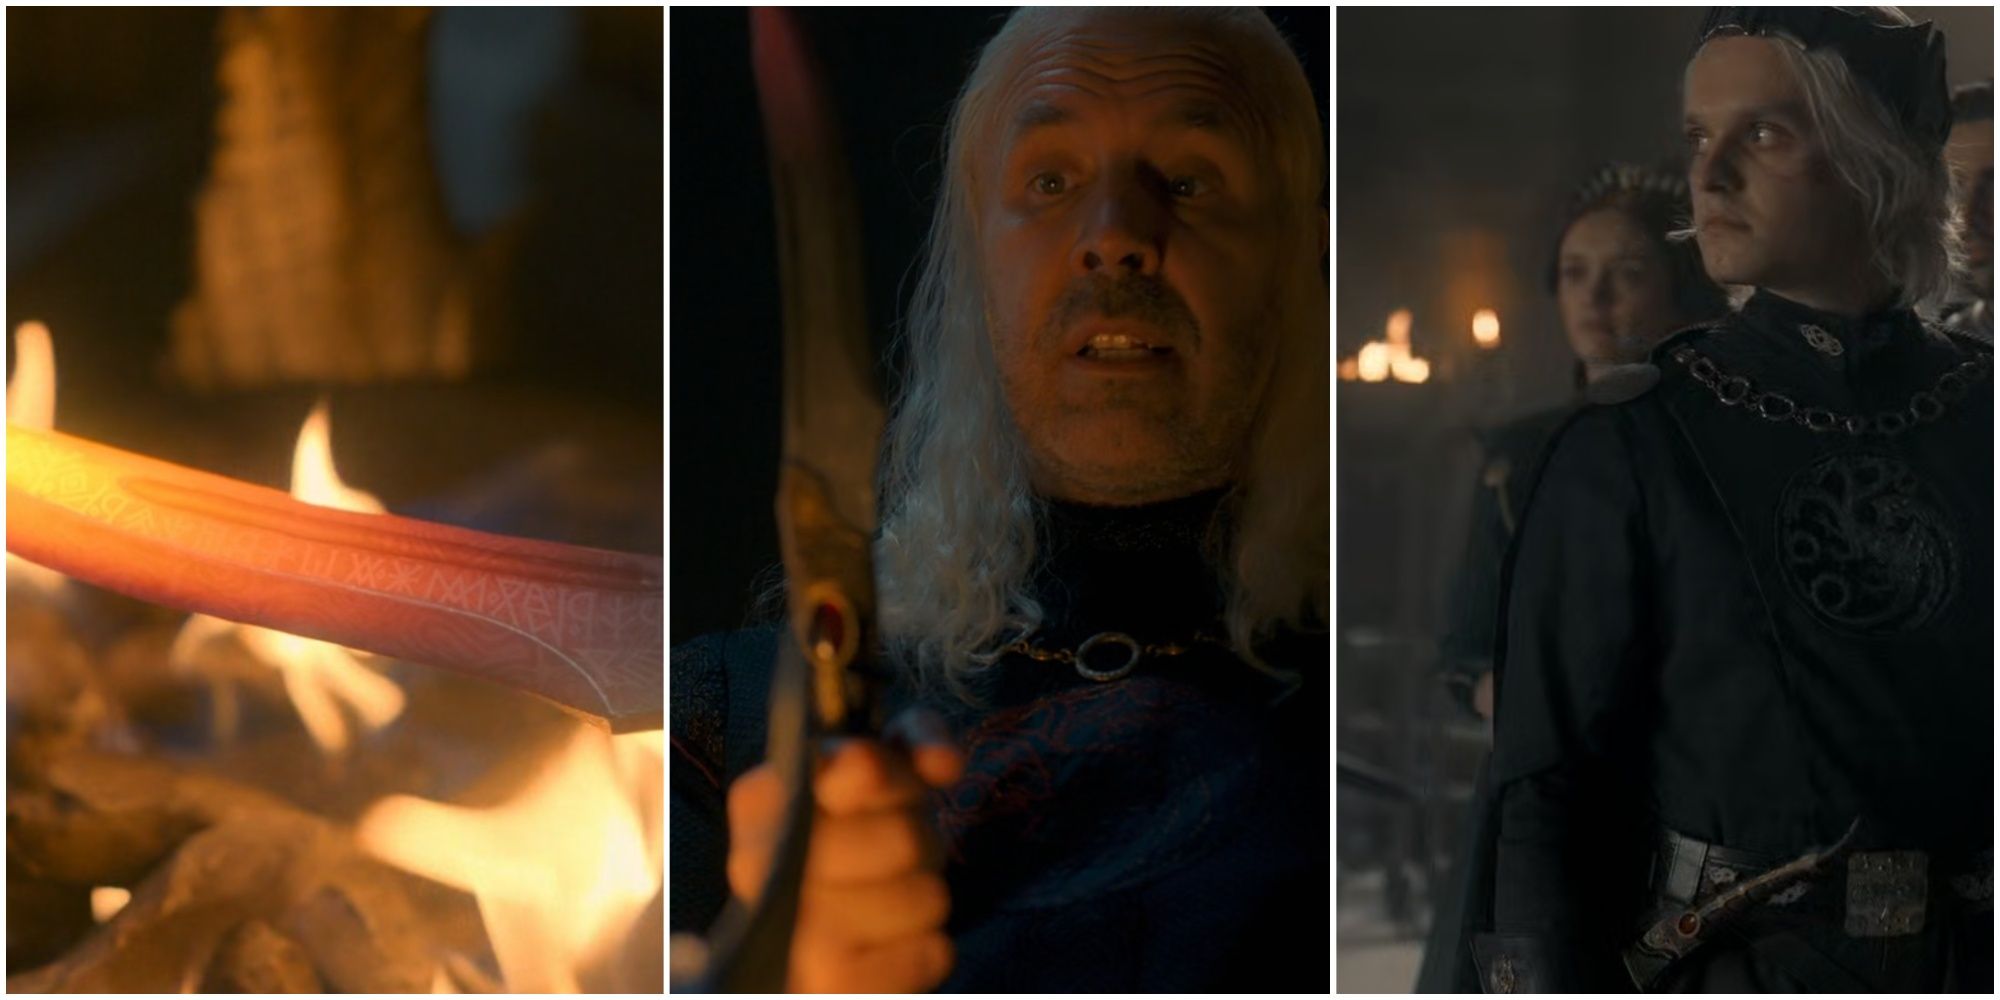 The Valyrian steel dagger in a brazier, with Viserys and Aegon II in House of the Dragon.